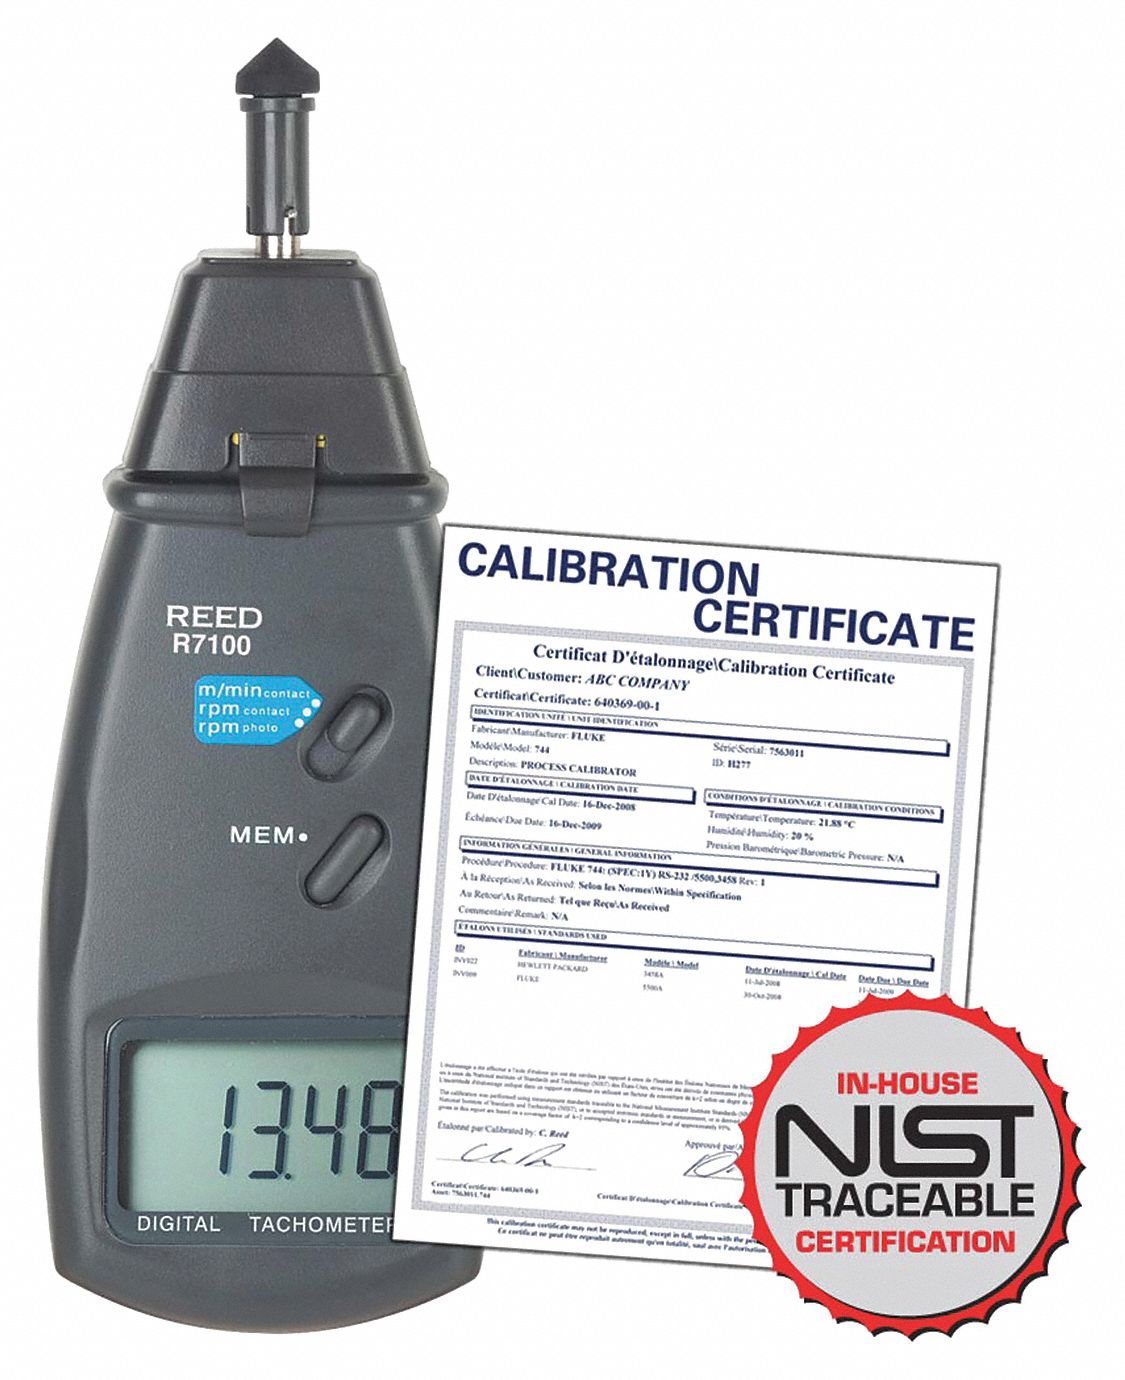 LASER PHOTO TACHOMETER WITH CALIBRATION